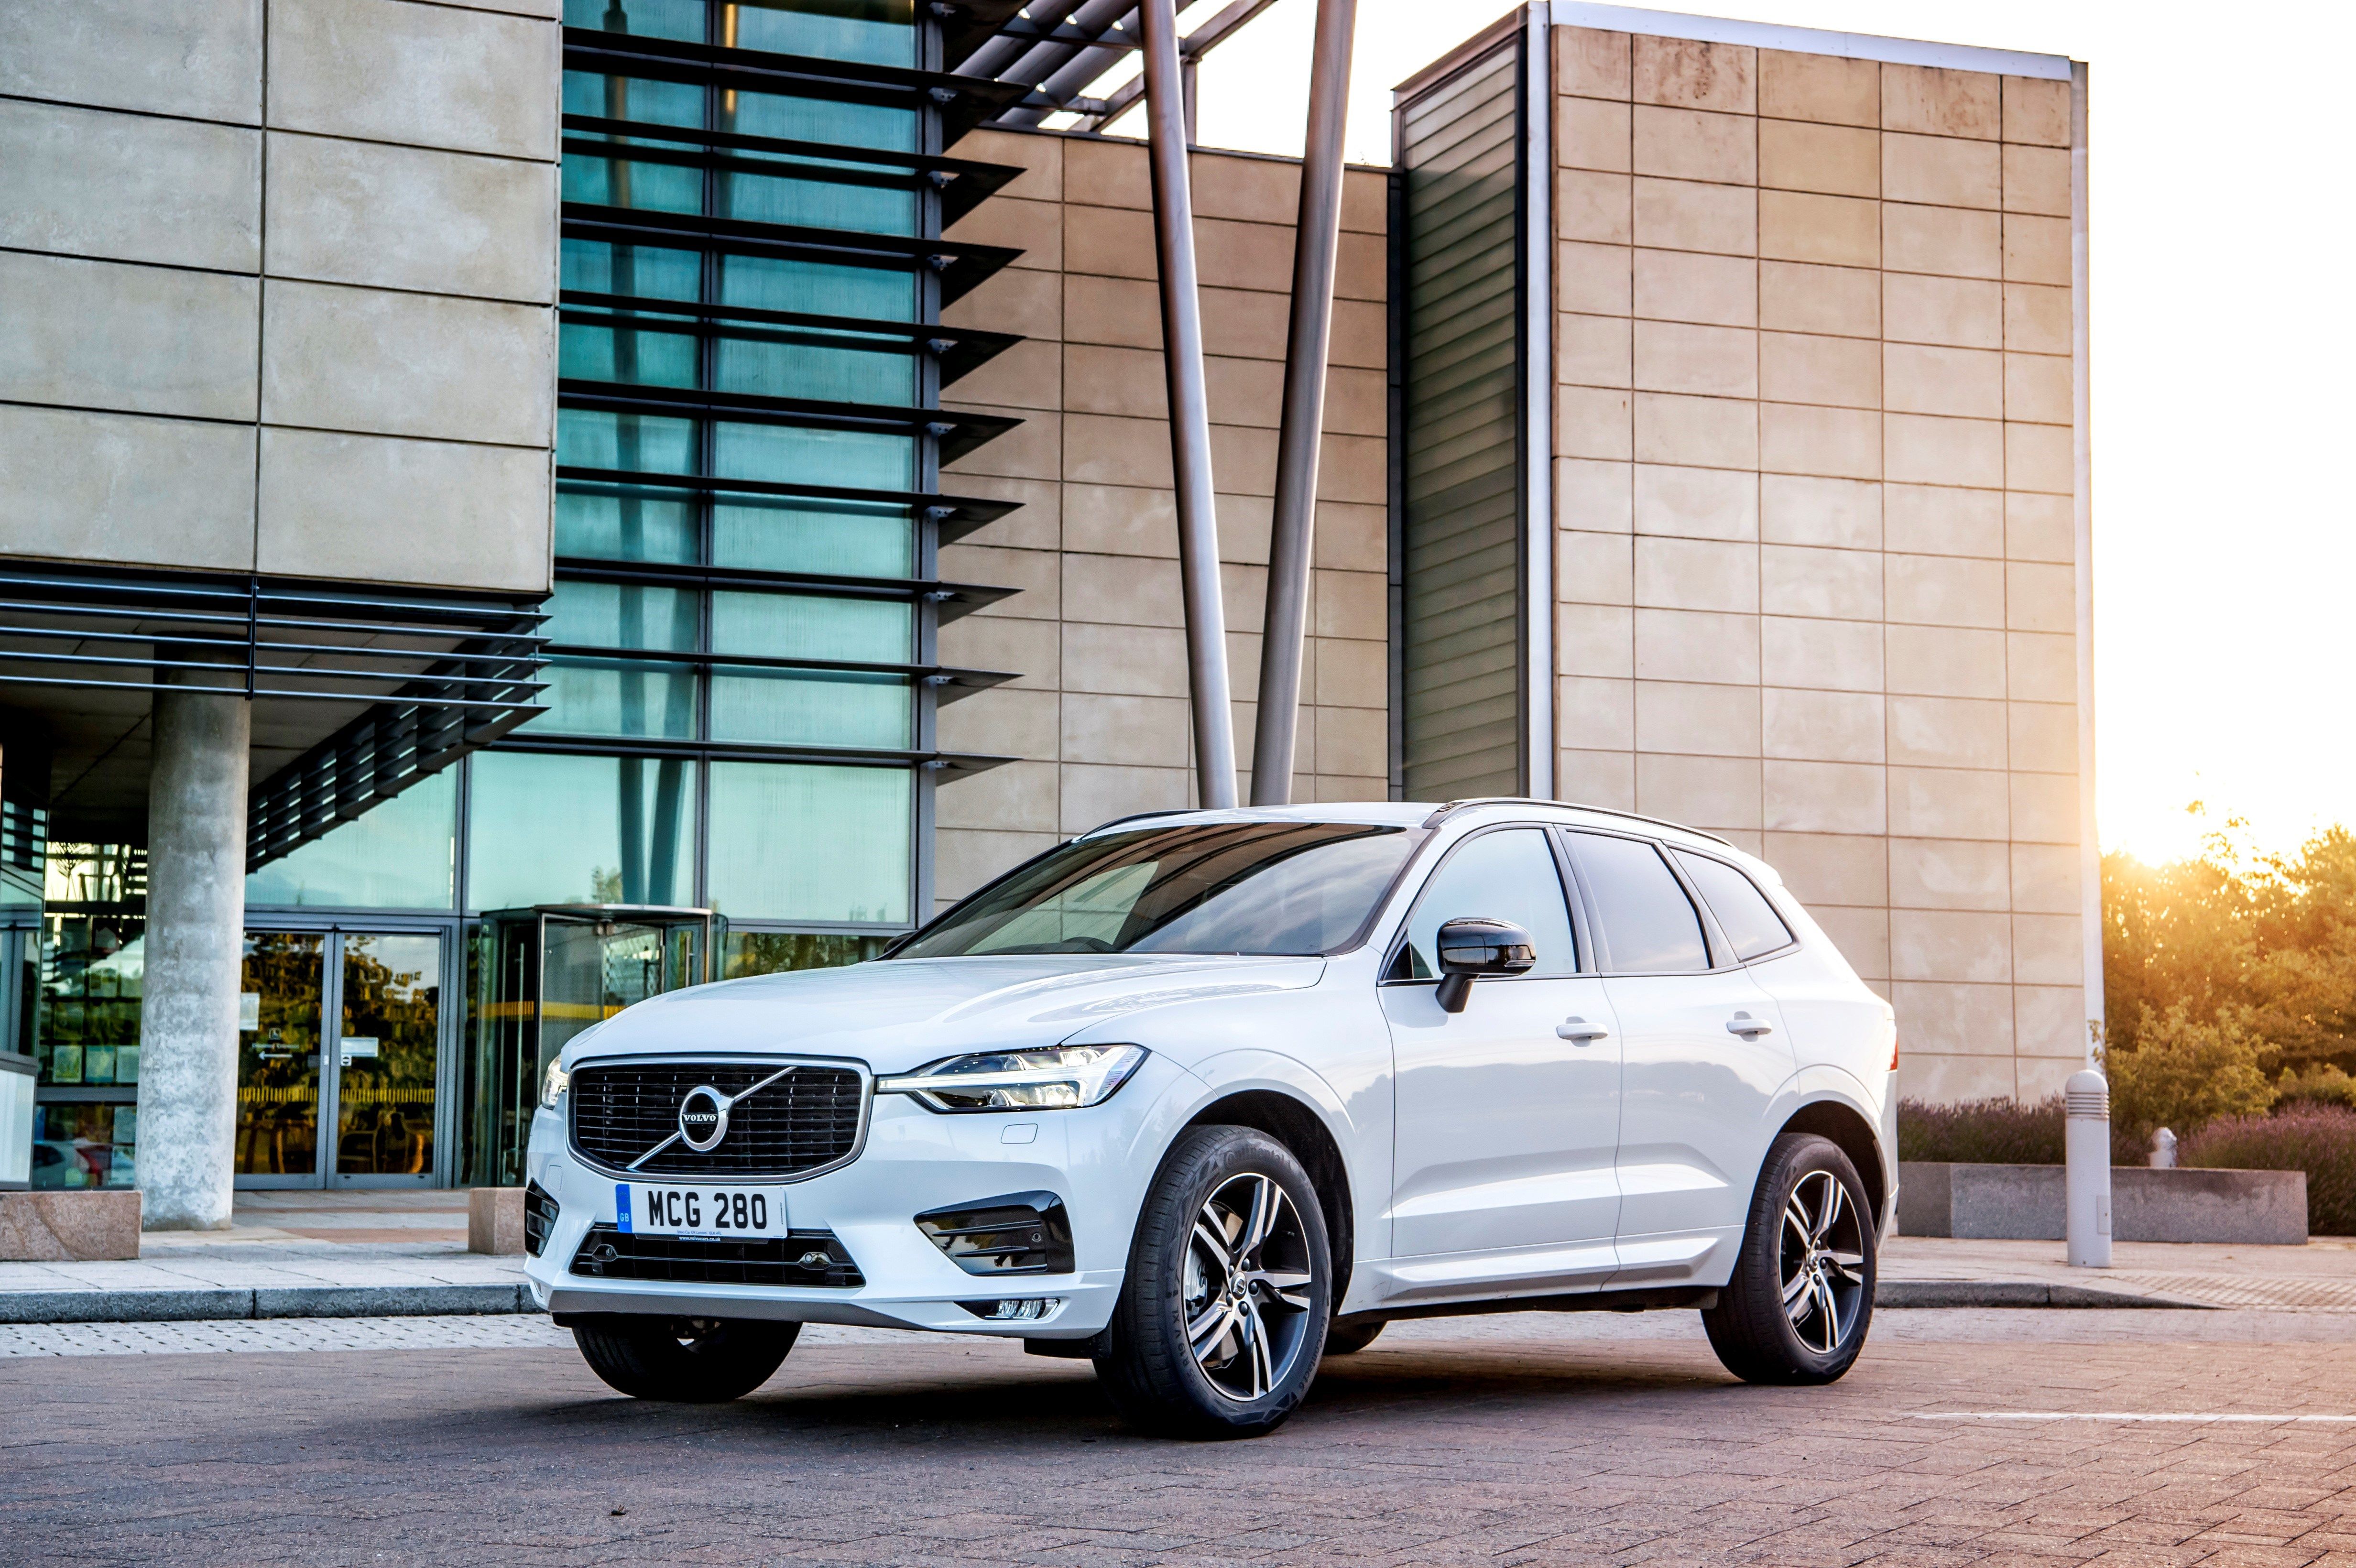 XC60 Crowned best Used Large SUV in the What Car? Used Car of the Year Awards